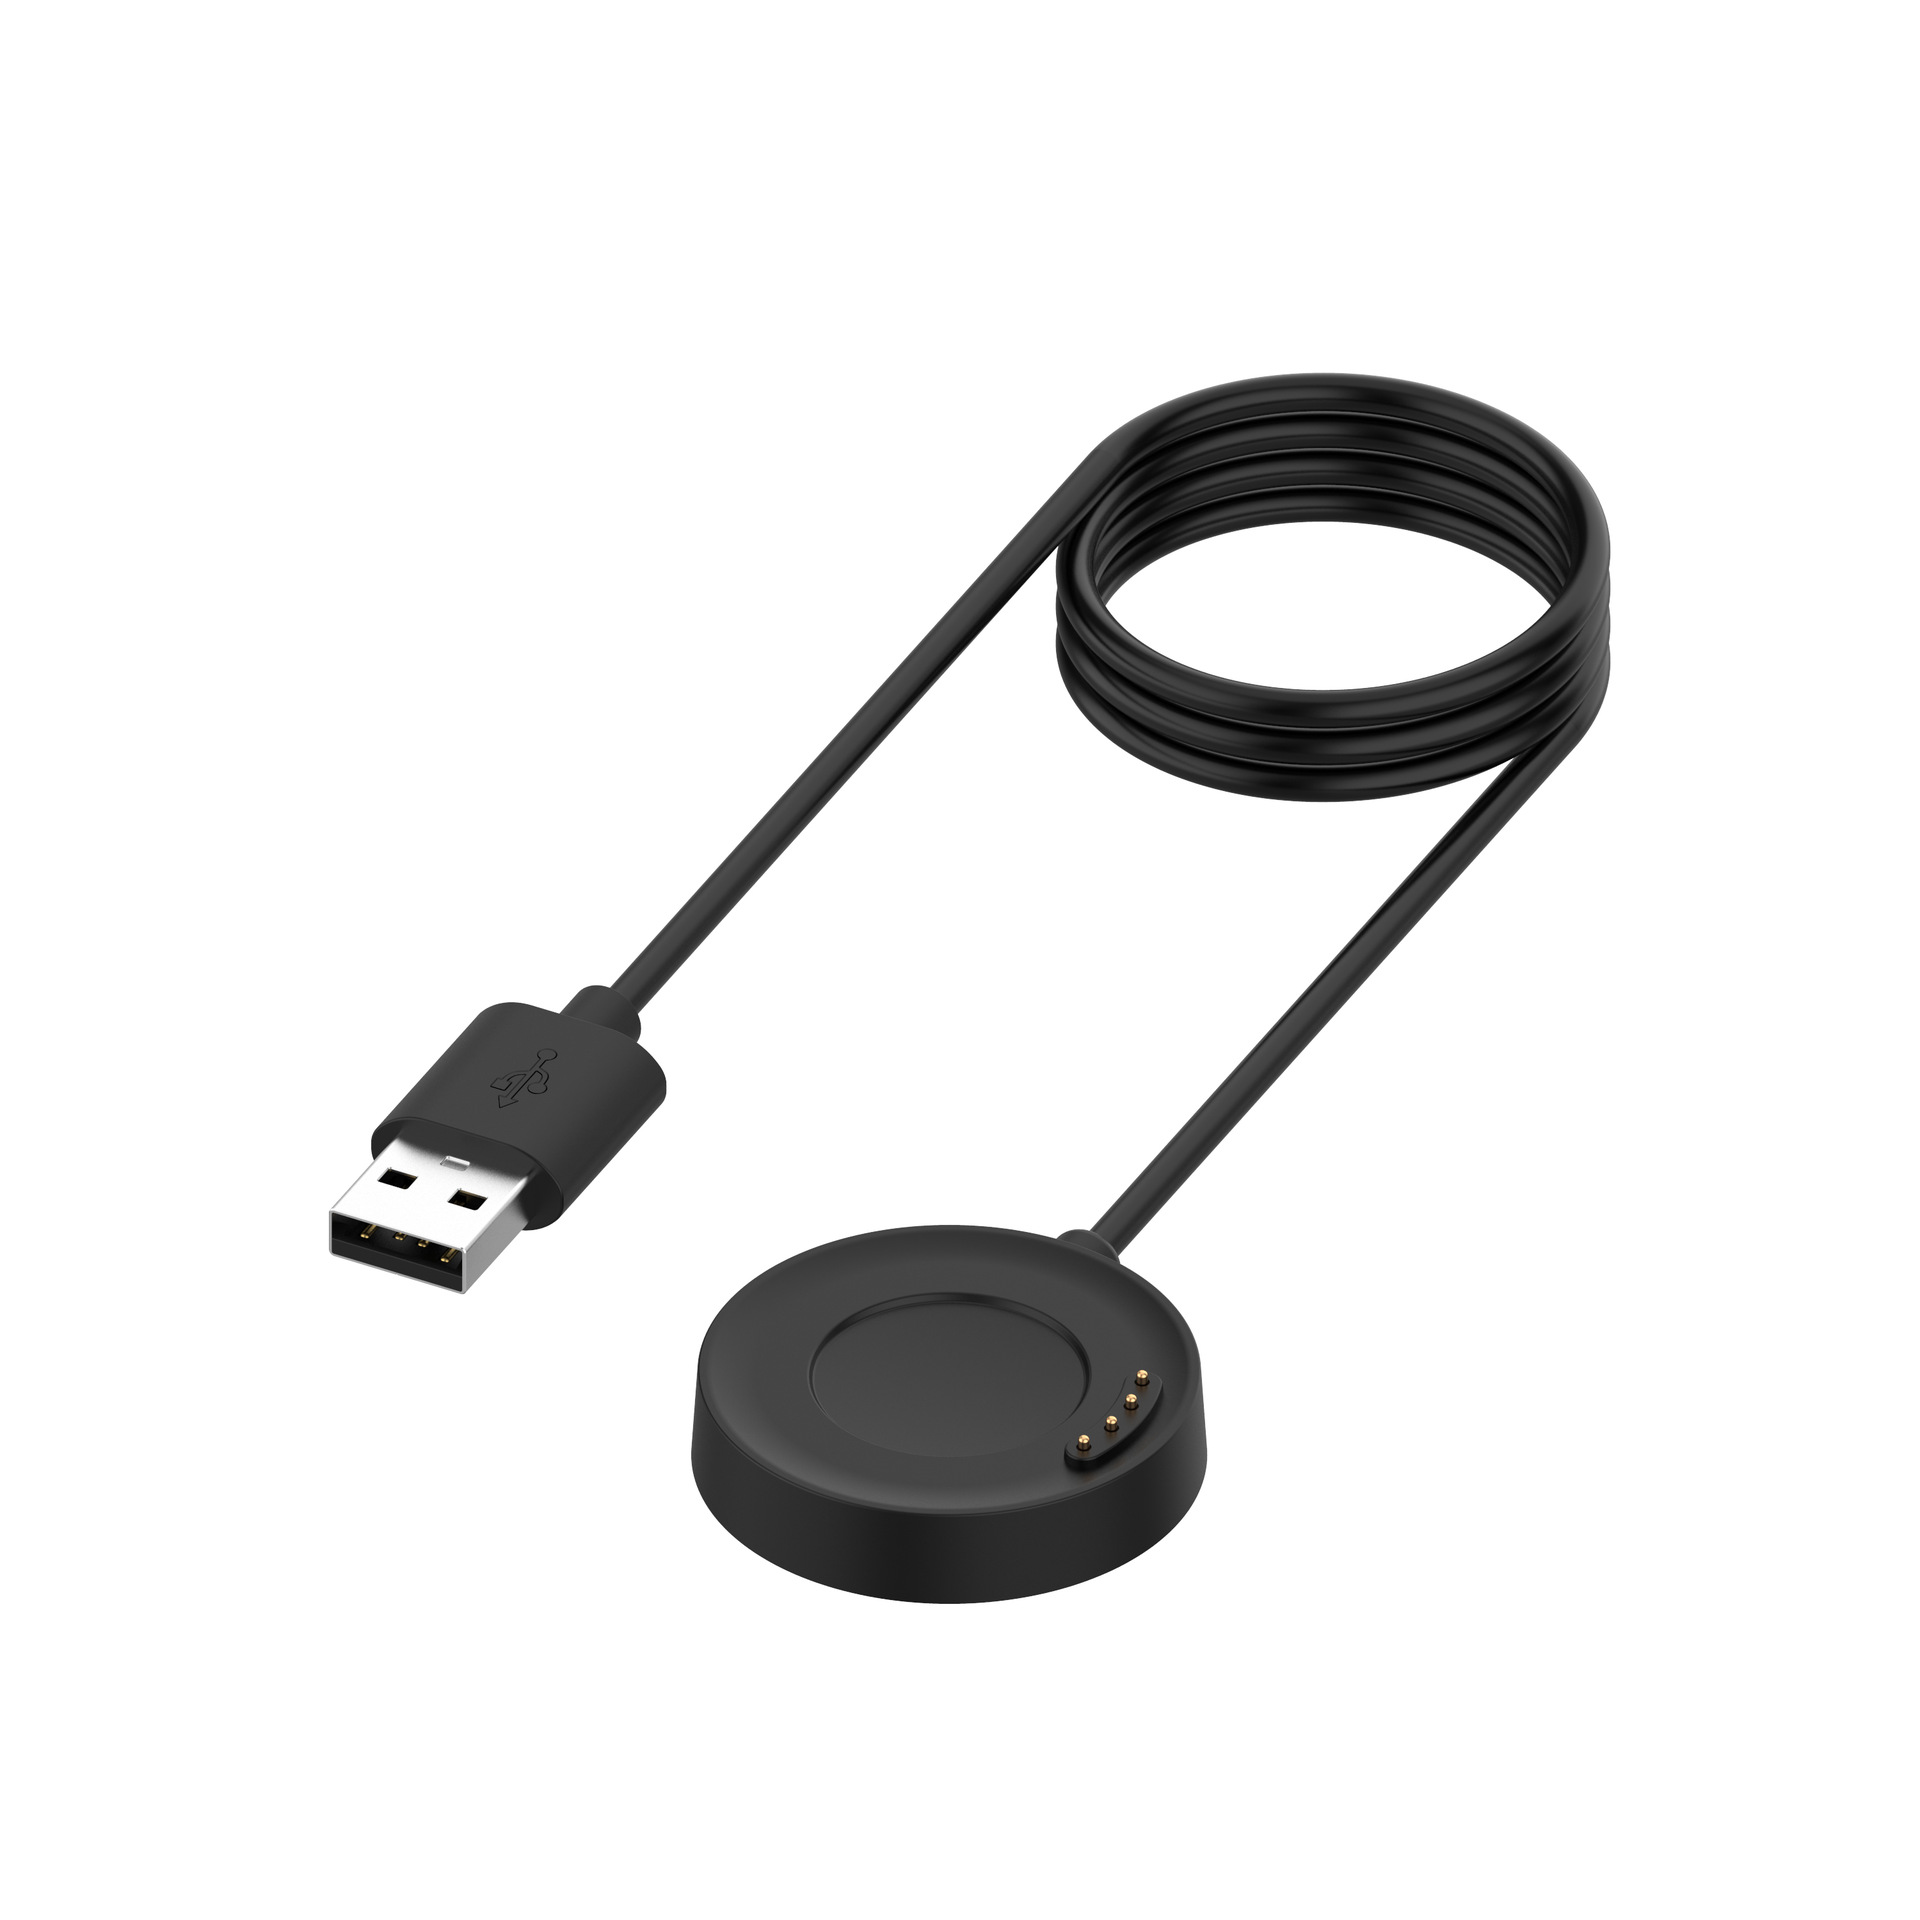 Bakeey-1M-TPU-Watch-Cable-Magnetic-Charger-Cable-for-Amazfit-stratos-3-Smart-Watch-Non-original-1621669-6